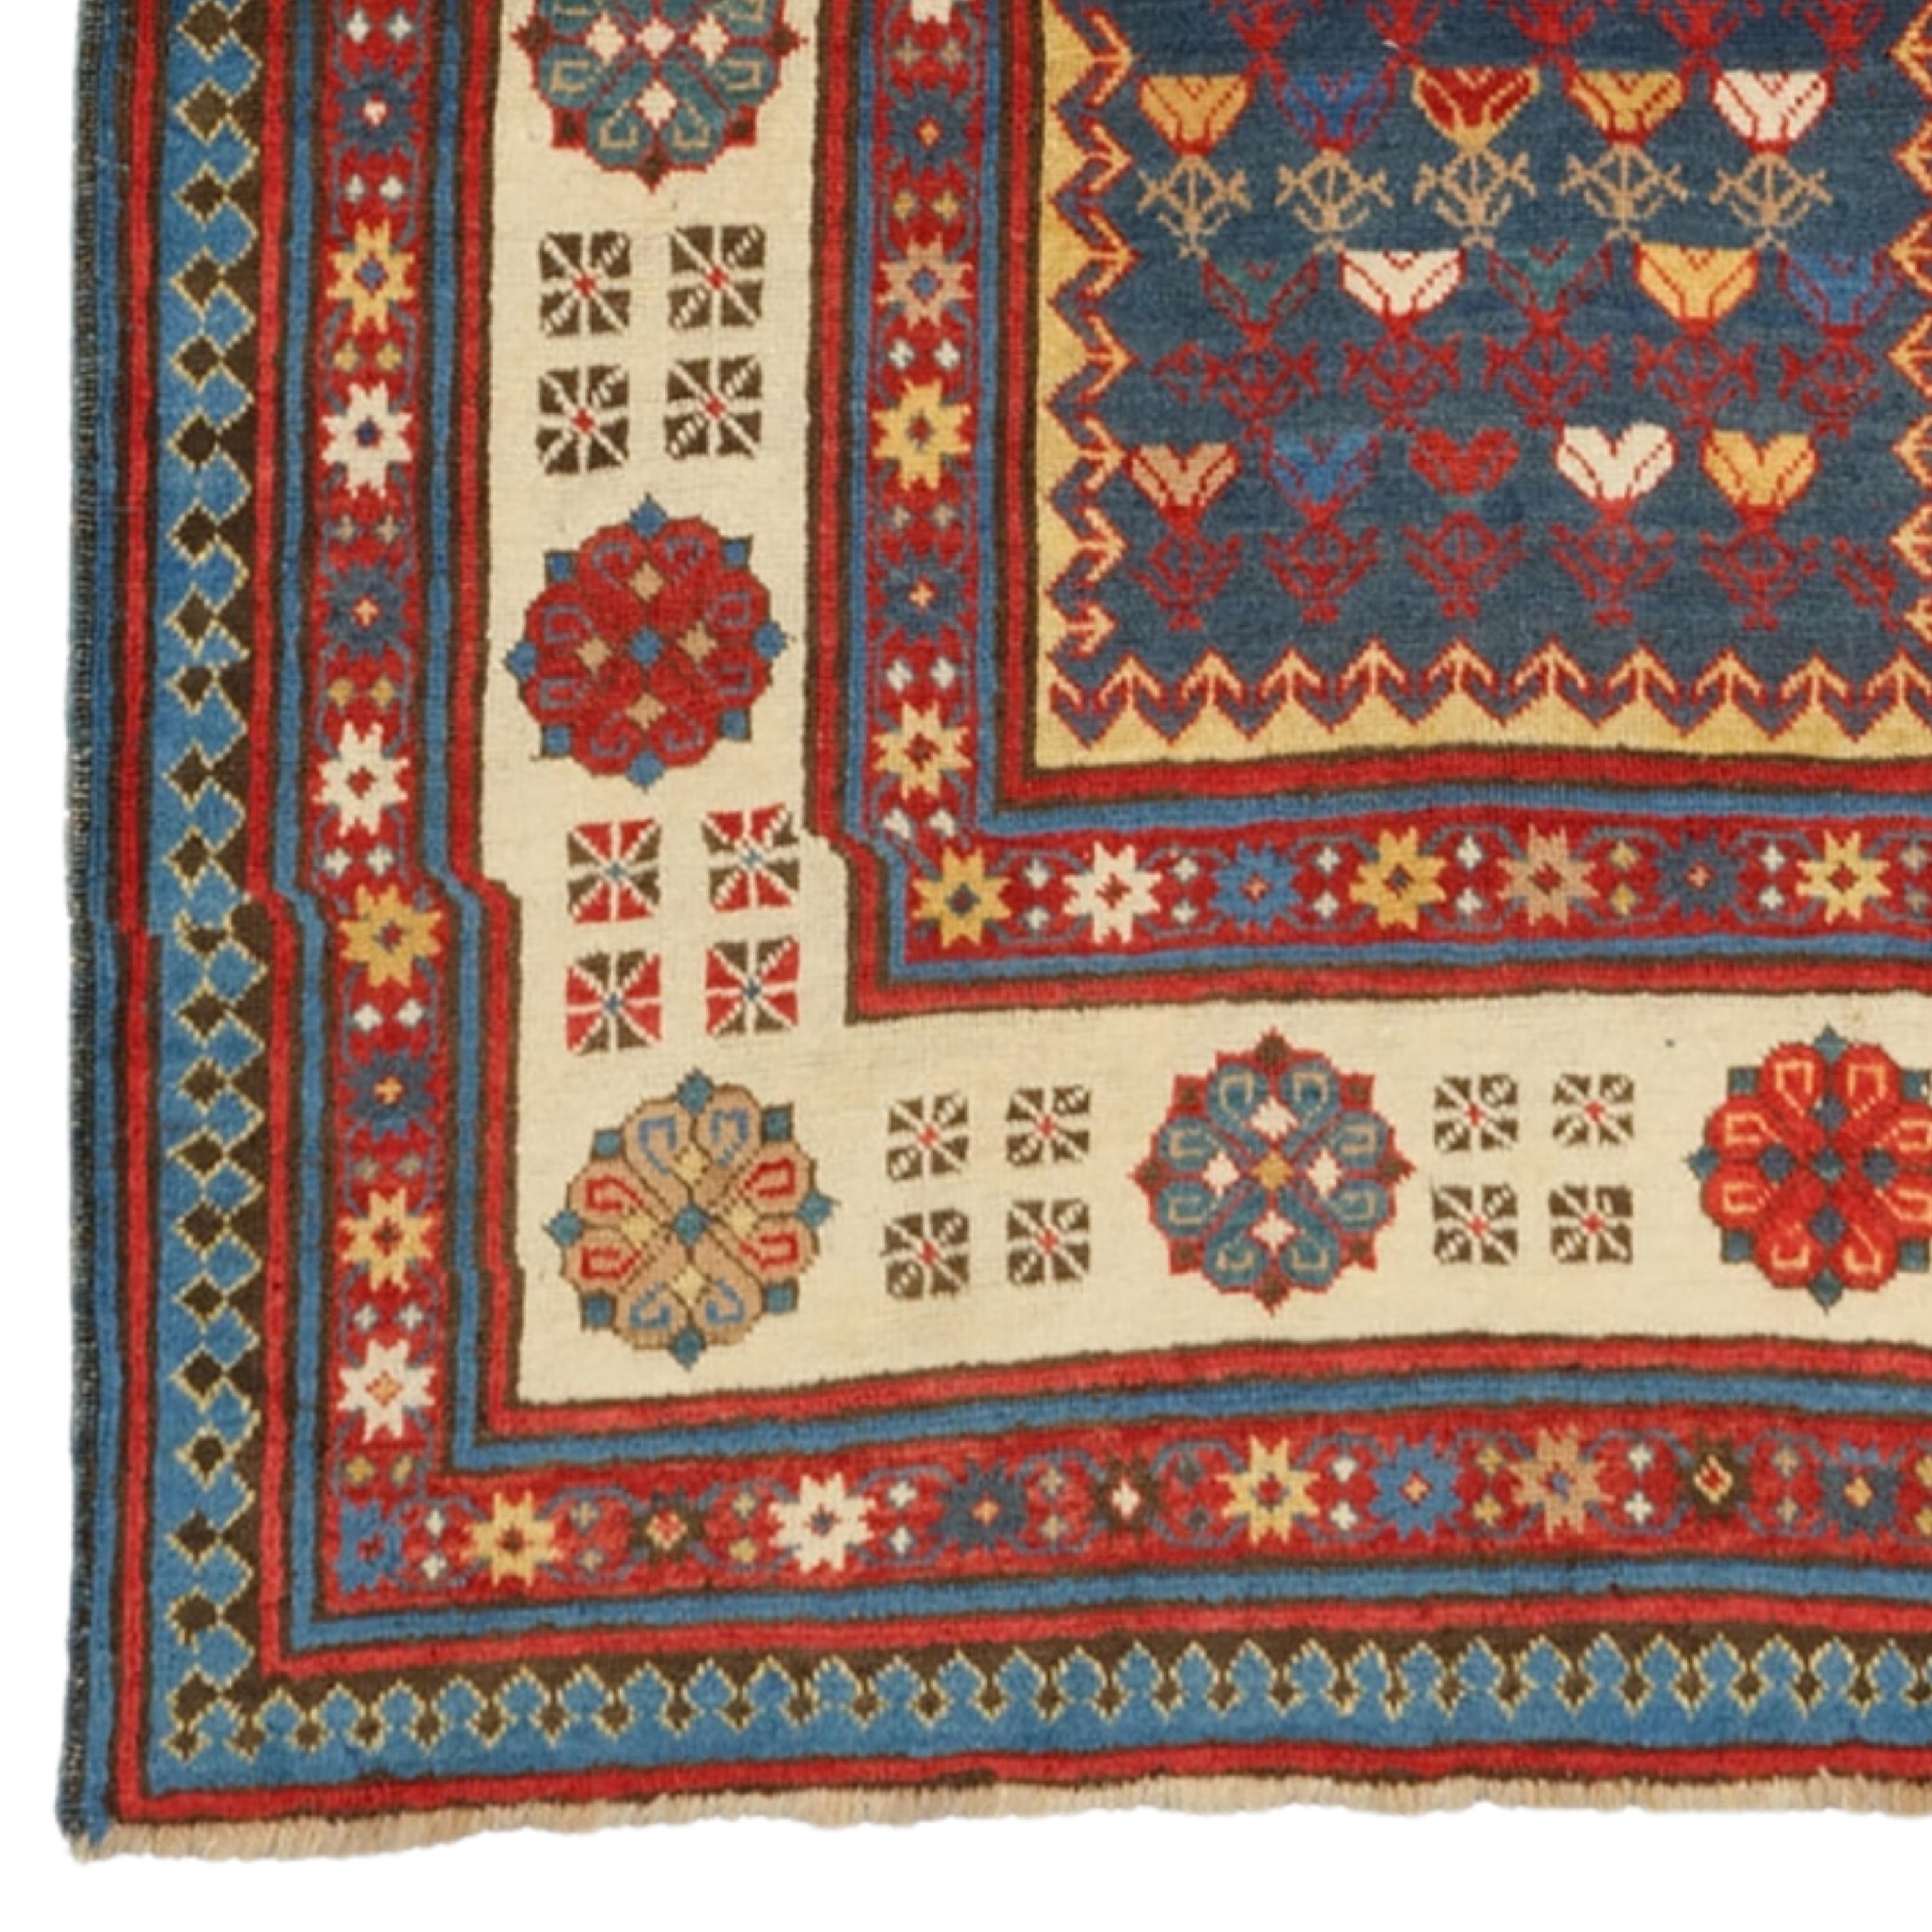 Talish Rug | Caucasus Rug
Late of the 19th Century Caucasian Talish Rug
Size : 107 x 260 cm

Antique tallish carpets are traditional carpets woven in the Talish region in the south of the Caucasus. These carpets usually contain geometric patterns